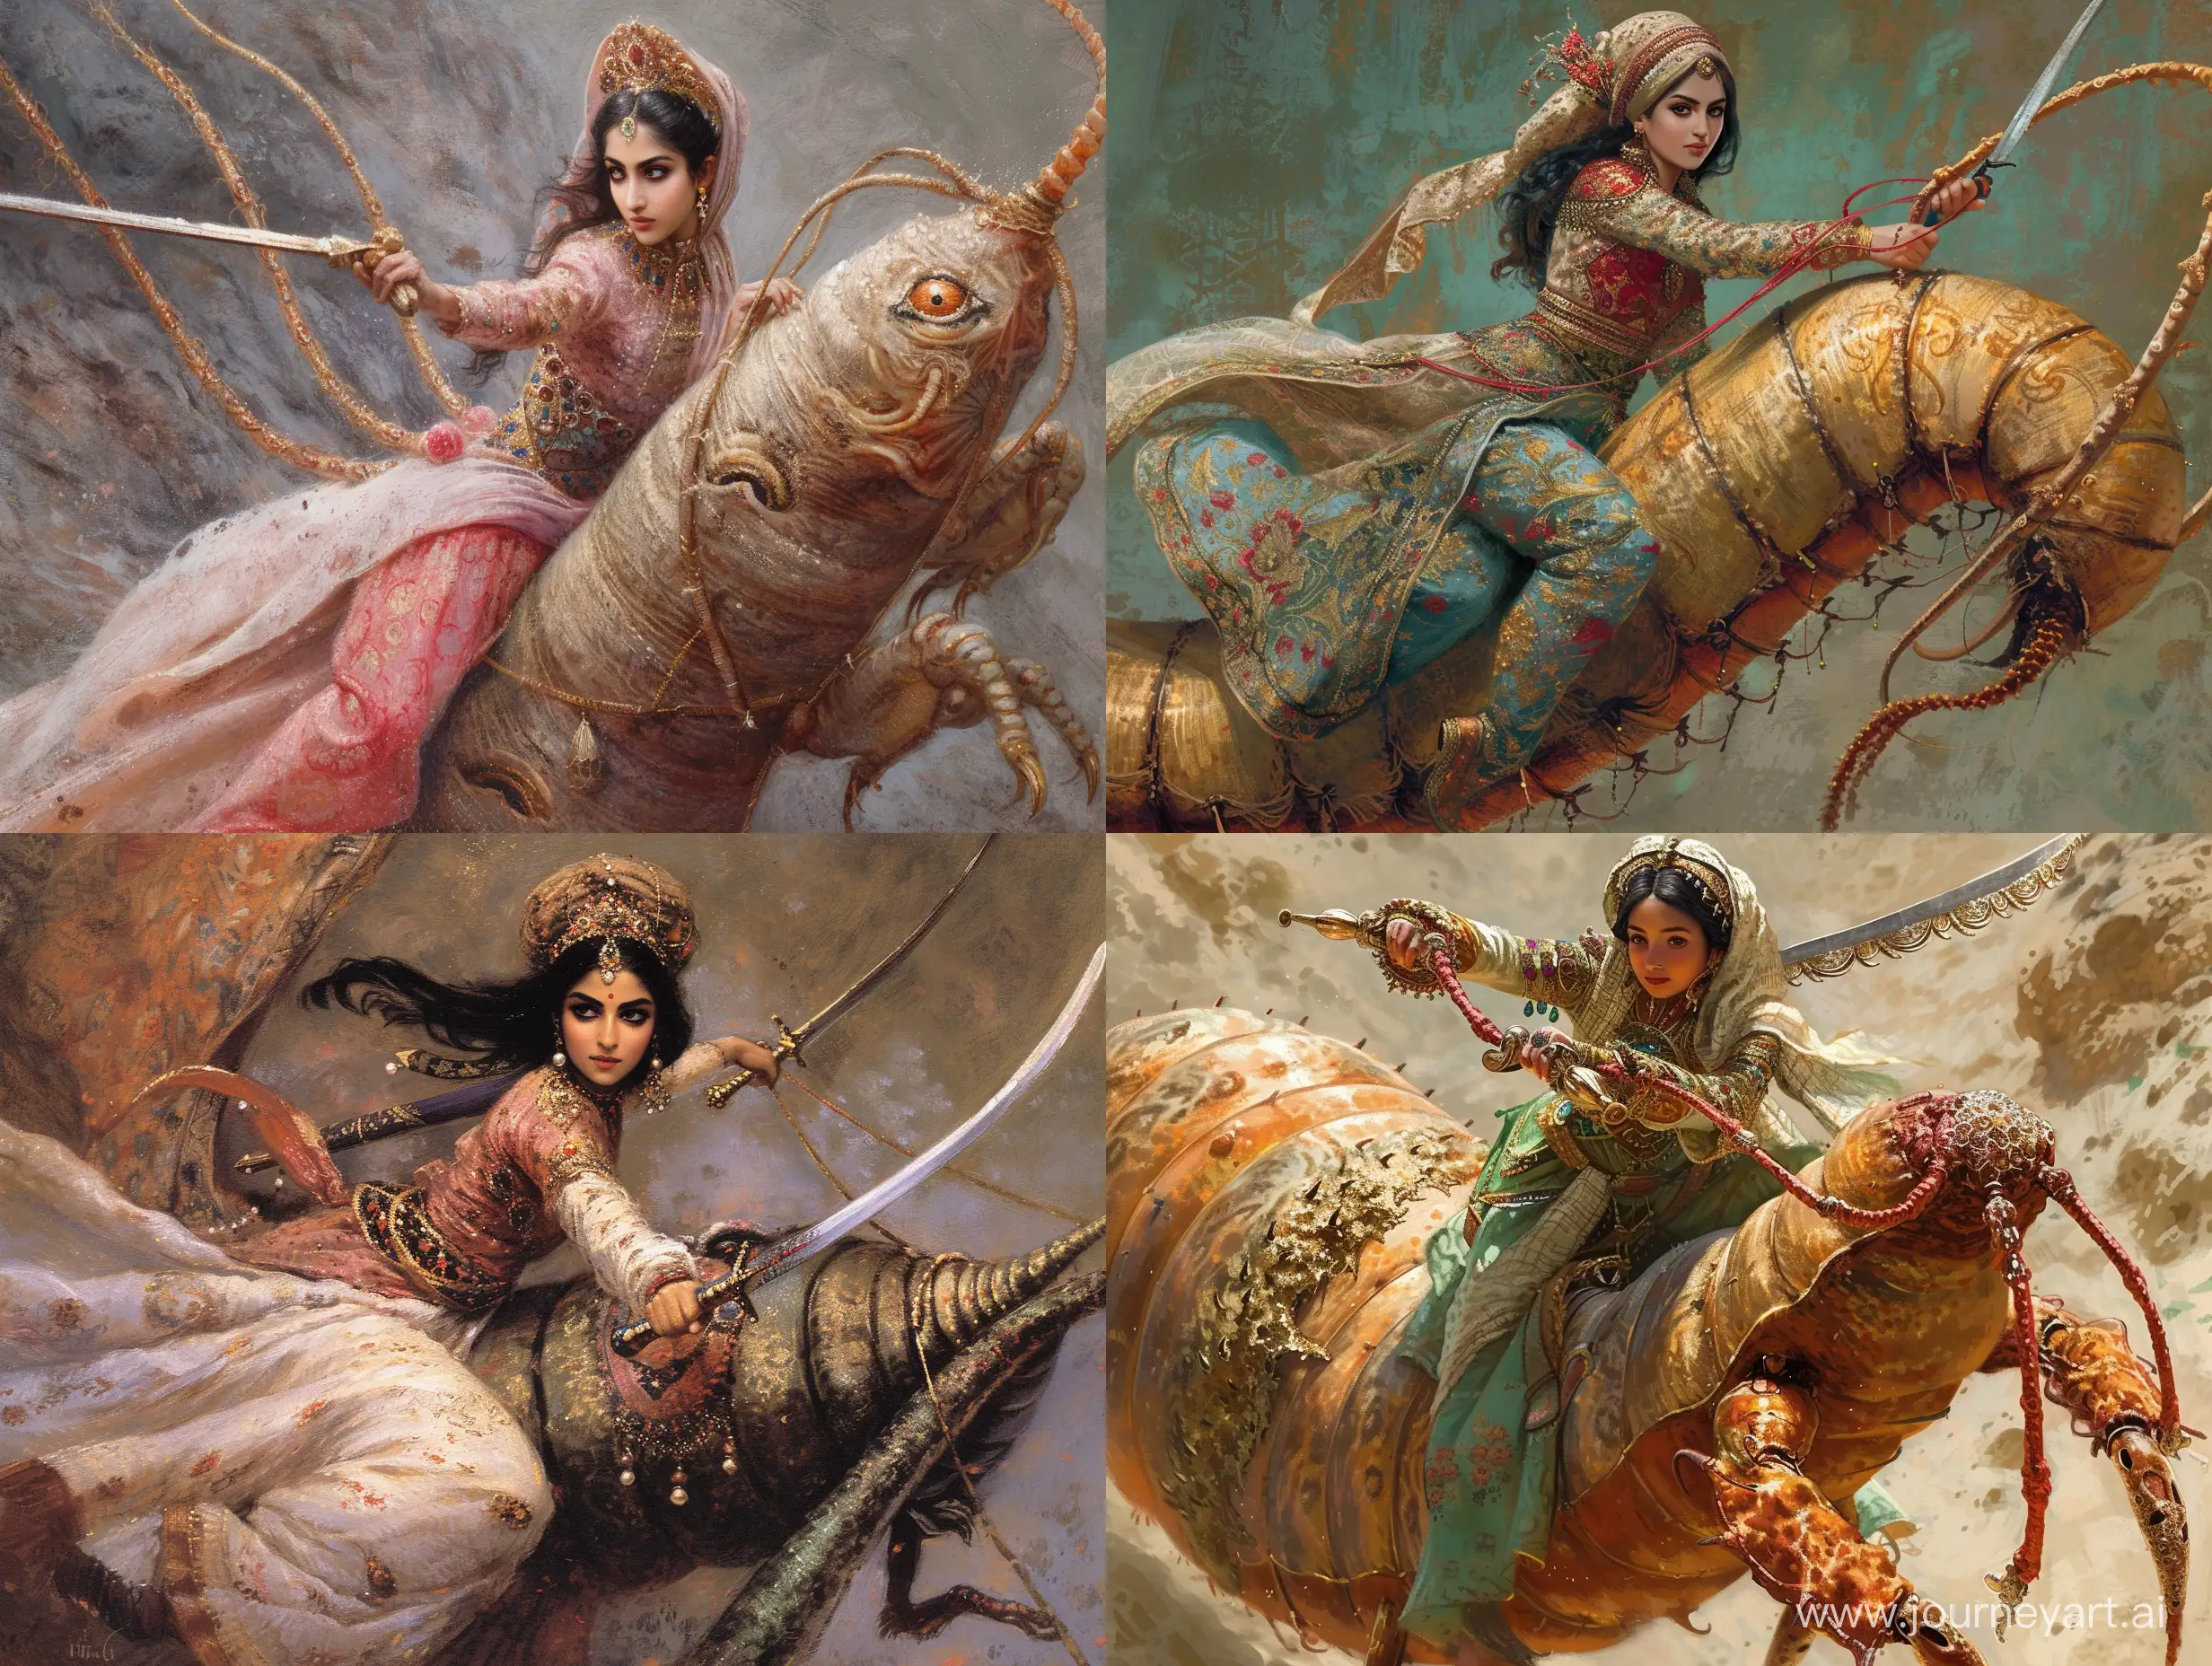 The beautiful Persian princess is riding on the back of a giant silkworm and is holding the reins of the worm with one hand and a sword with the other hand.